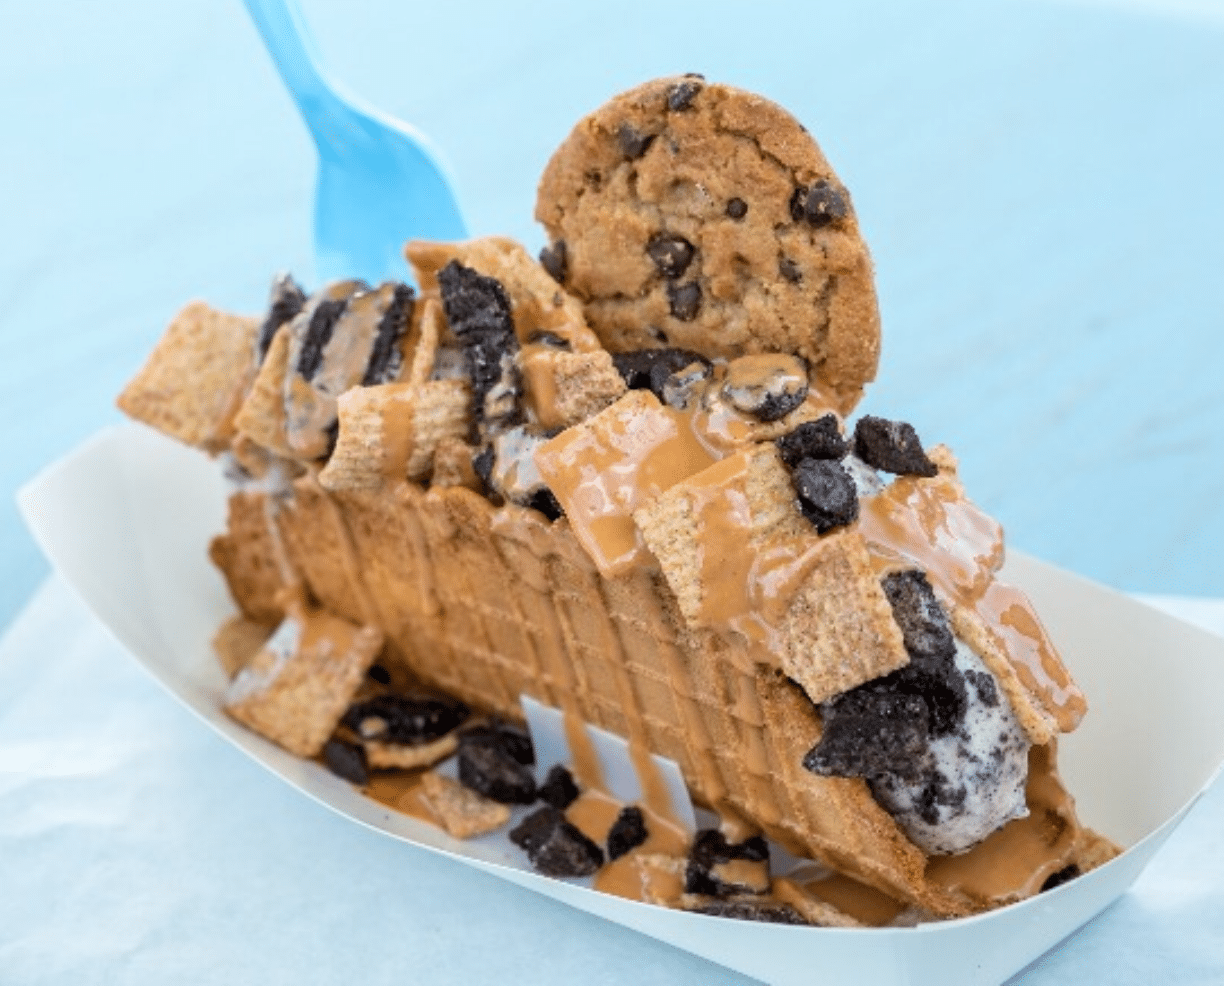 The Cookie Monster by Taco Sweets in Austin